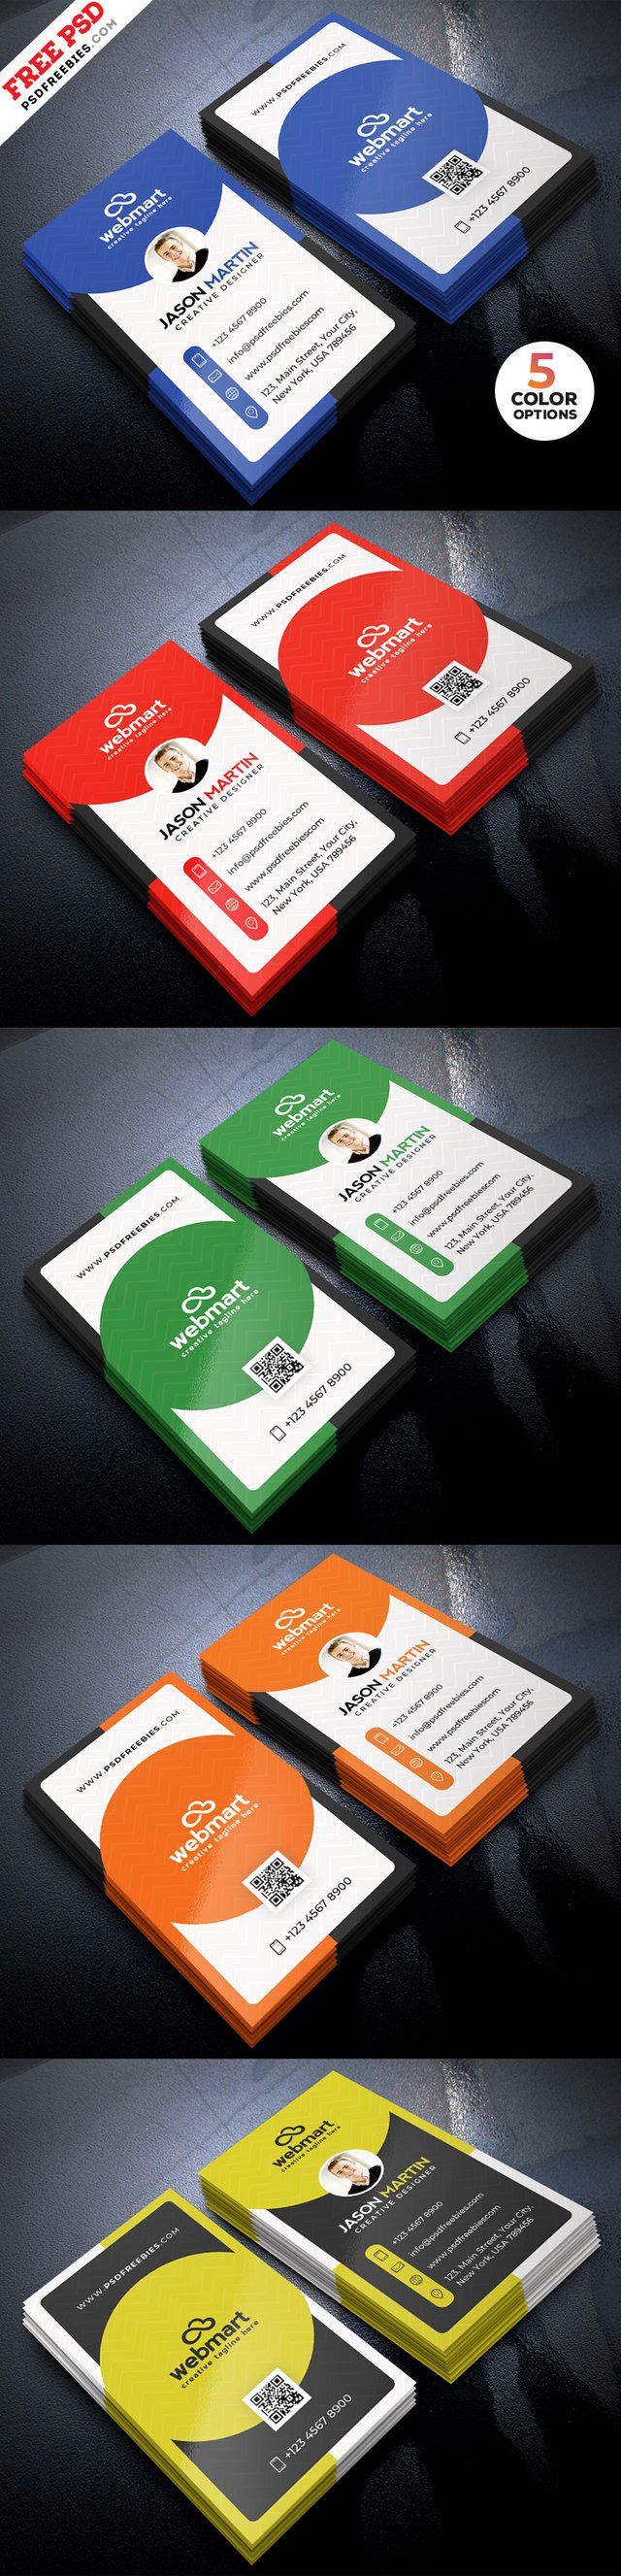 Creative-and-Clean-Business-Card-PSD-Preview.jpg